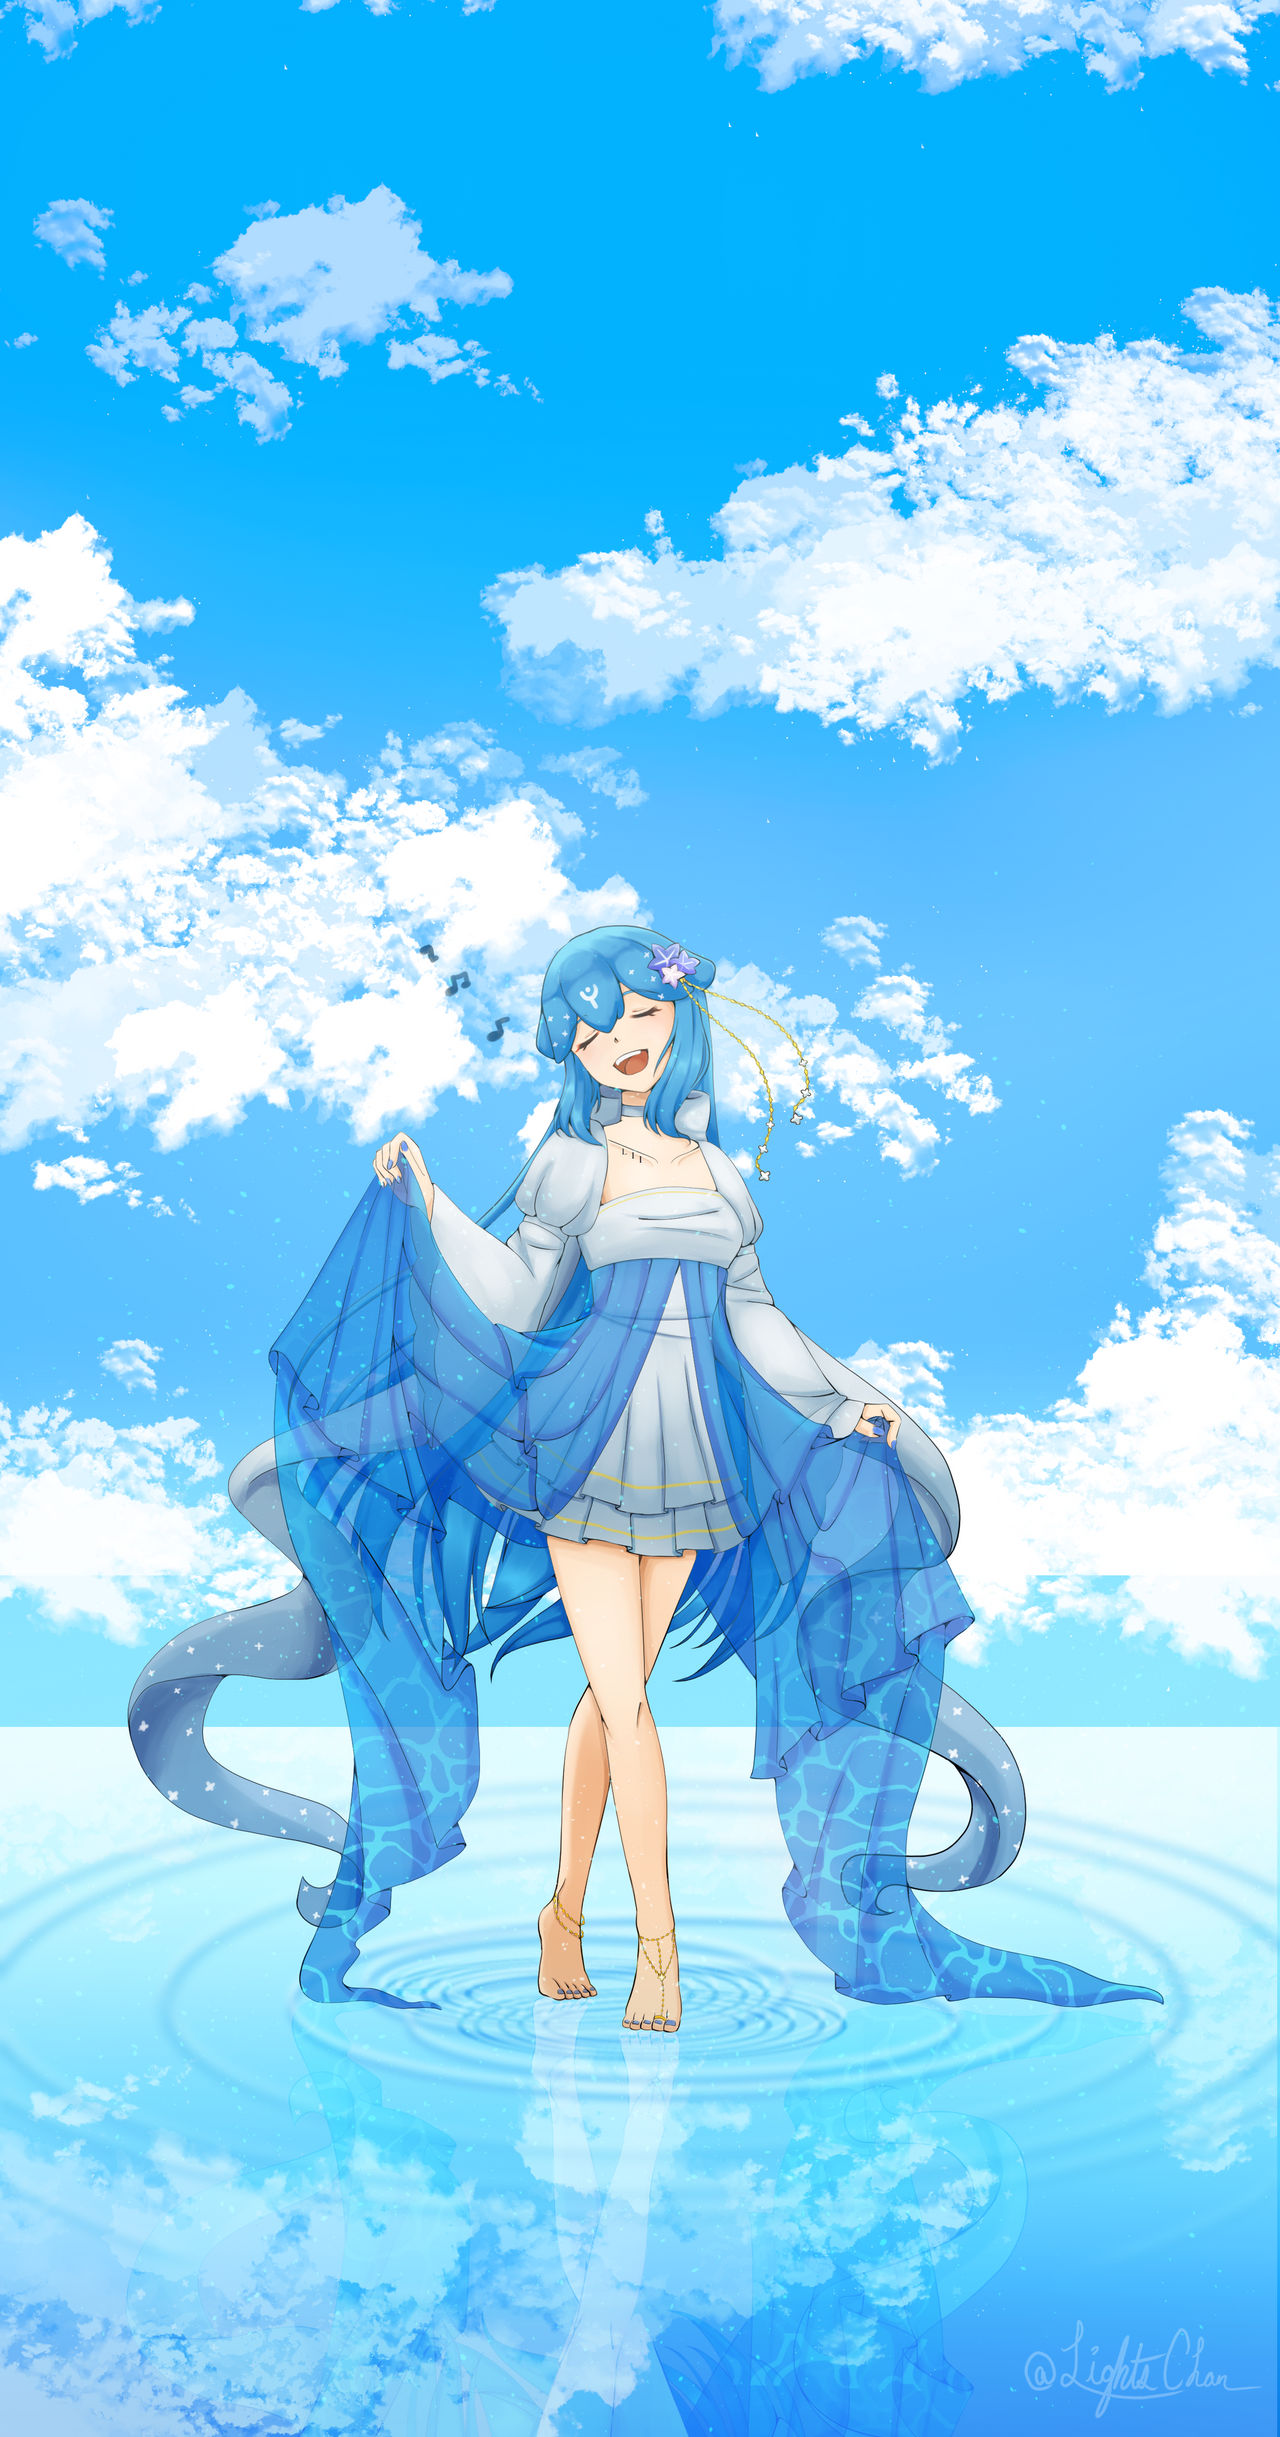 The Song of the 52-Hertz Whale by Lights-chan on DeviantArt